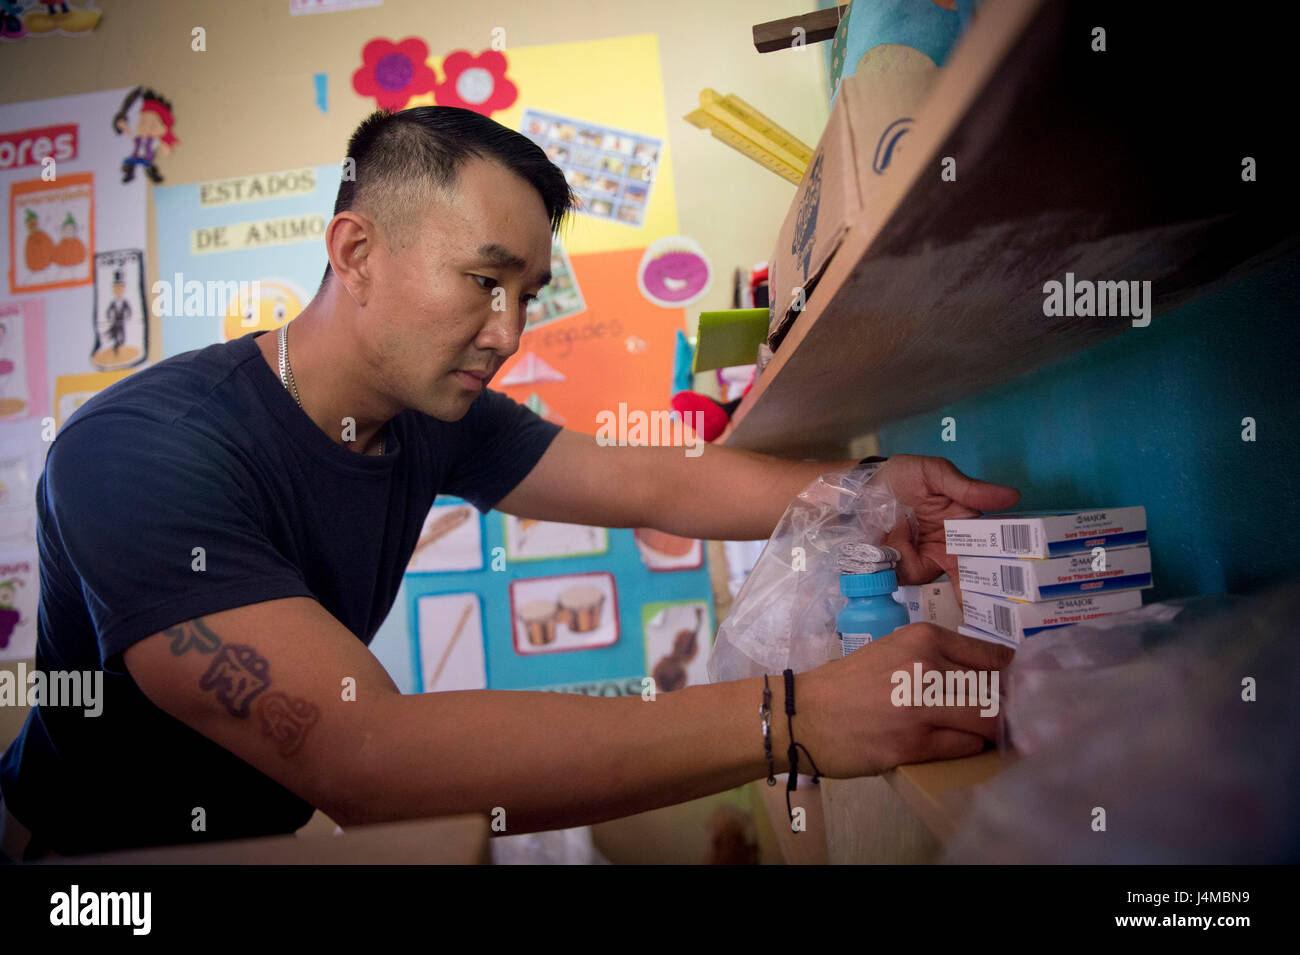 170220-N-YL073-088 TRUJILLO, Honduras (Feb. 20, 2017) – Lt. Donny Le, a native of Boston attached to Naval Hospital Pensacola, Fla., organizes prescription medication at the Continuing Promise 2017 (CP-17) medical site in support of CP-17's visit to Trujillo, Honduras. CP-17 is a U.S. Southern Command-sponsored and U.S. Naval Forces Southern Command/U.S. 4th Fleet-conducted deployment to conduct civil-military operations including humanitarian assistance, training engagements, and medical, dental, and veterinary support in an effort to show U.S. support and commitment to Central and South Amer Stock Photo